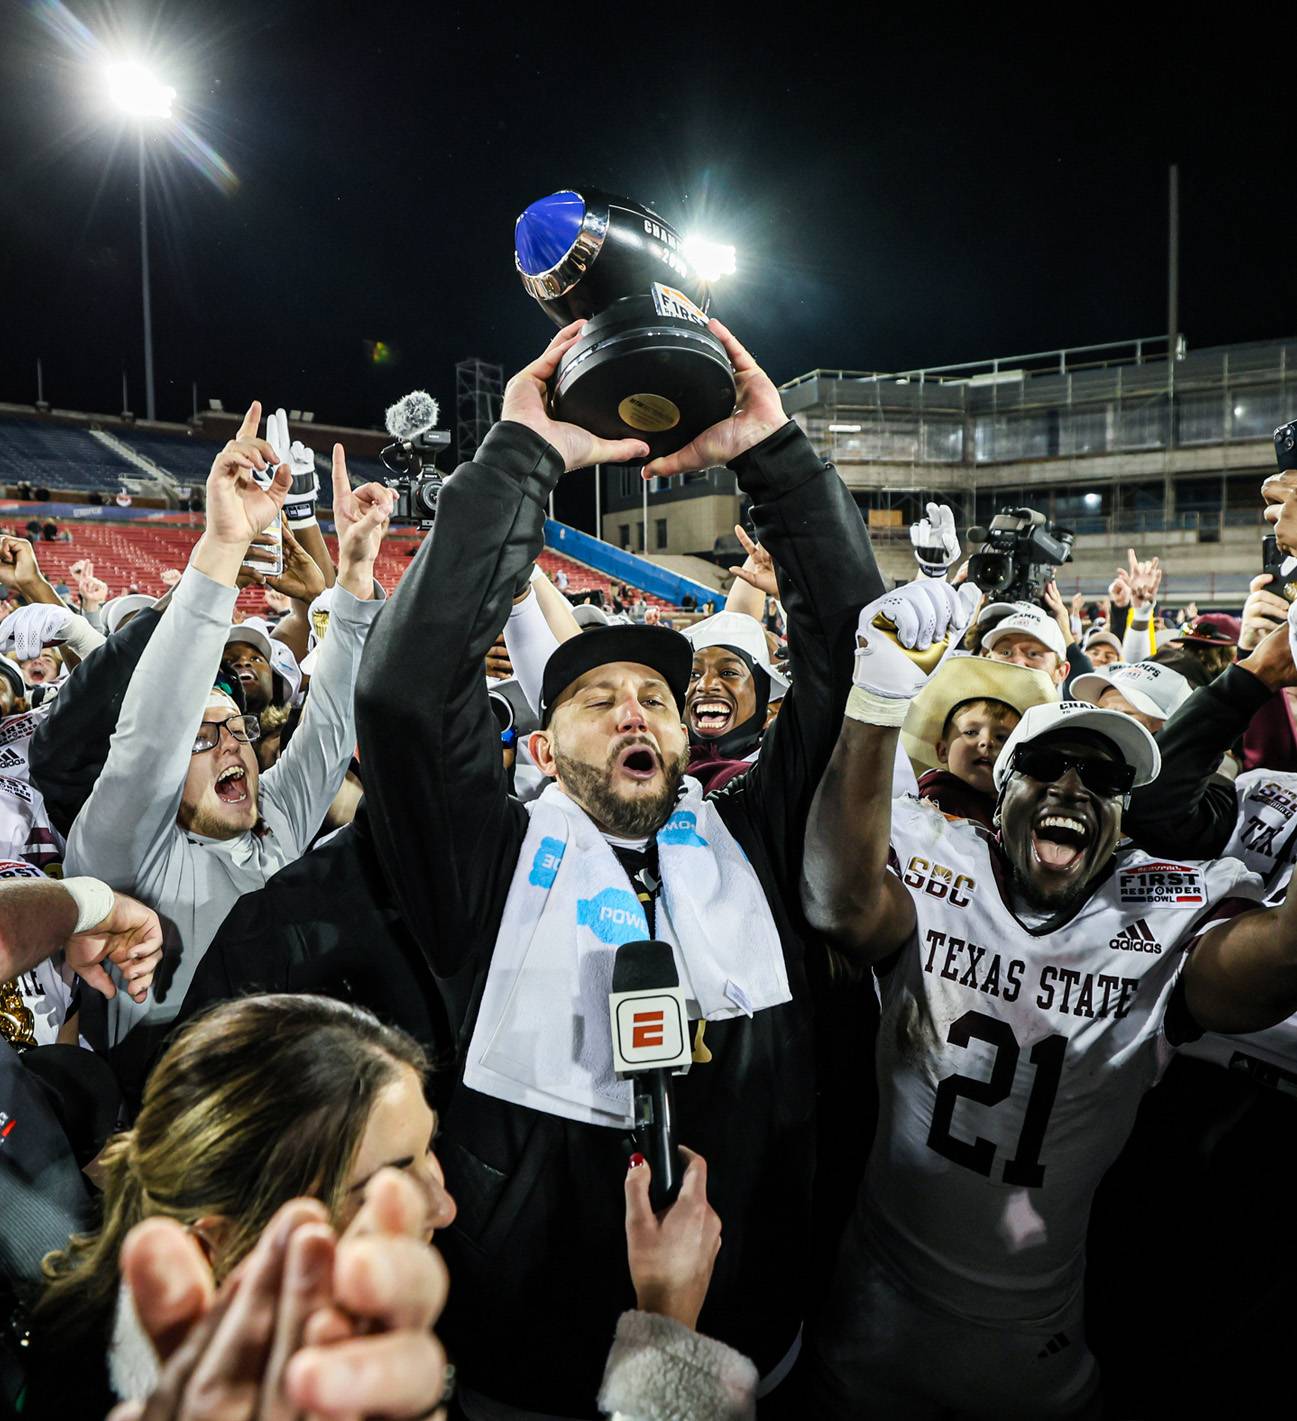 football coach holding up trophy in middle of group of football players